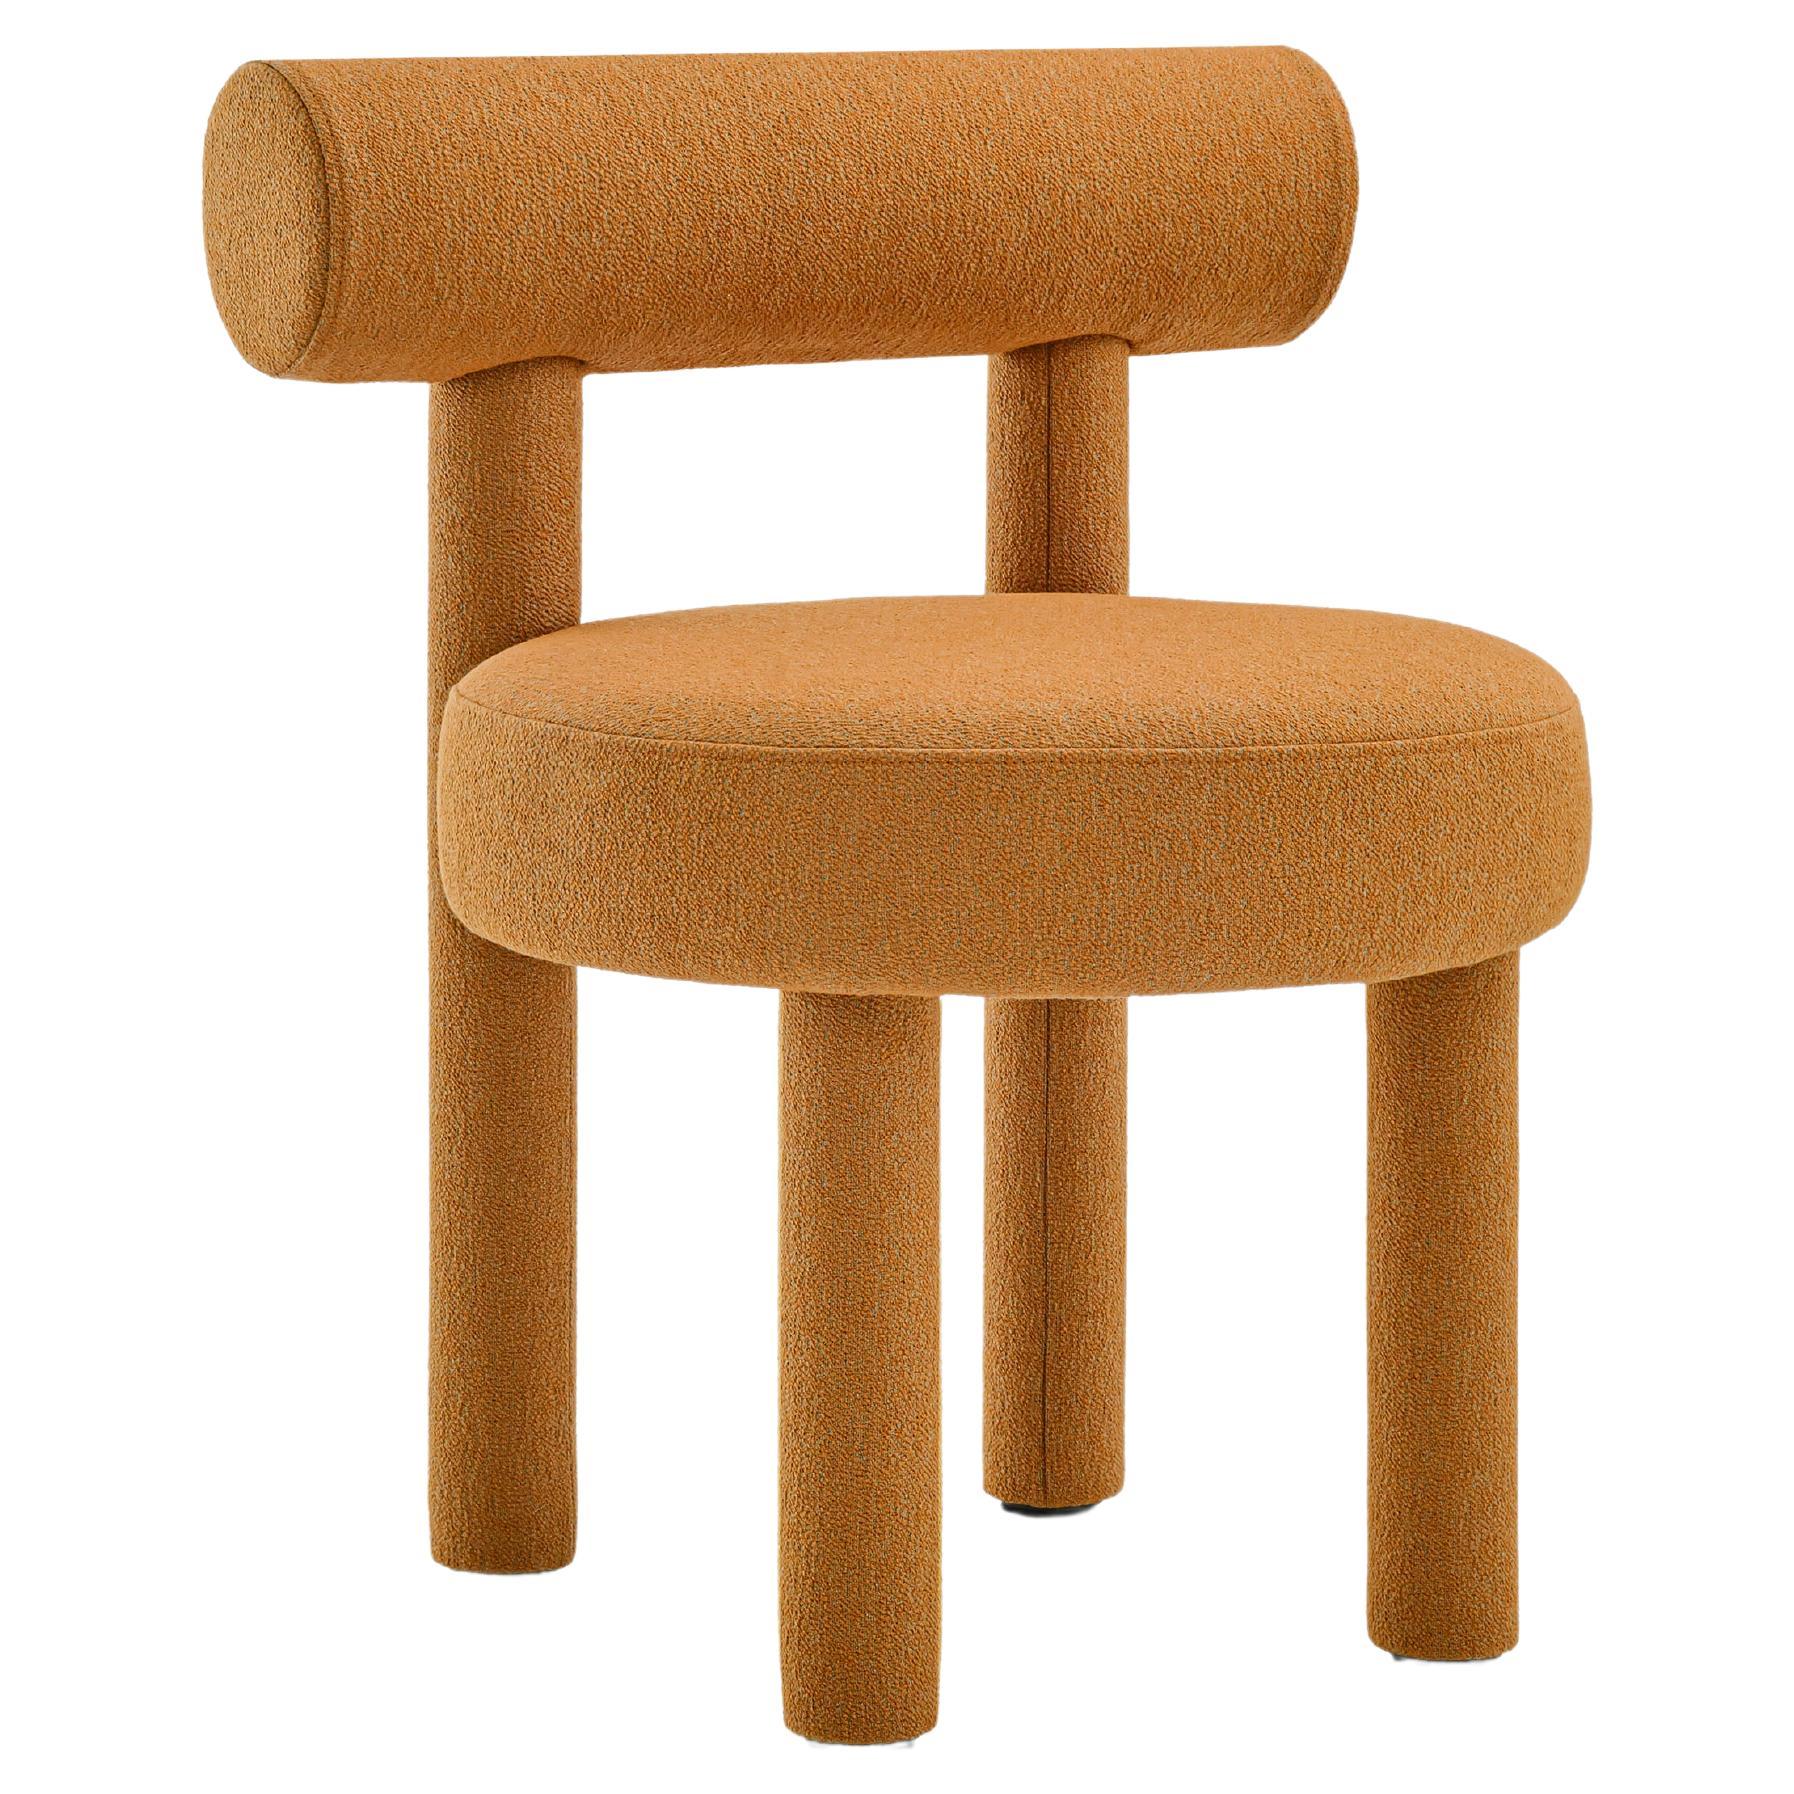 Modern Dining Chair Gropius CS1 in Rohi Sera Contract Wool Fabric by Noom